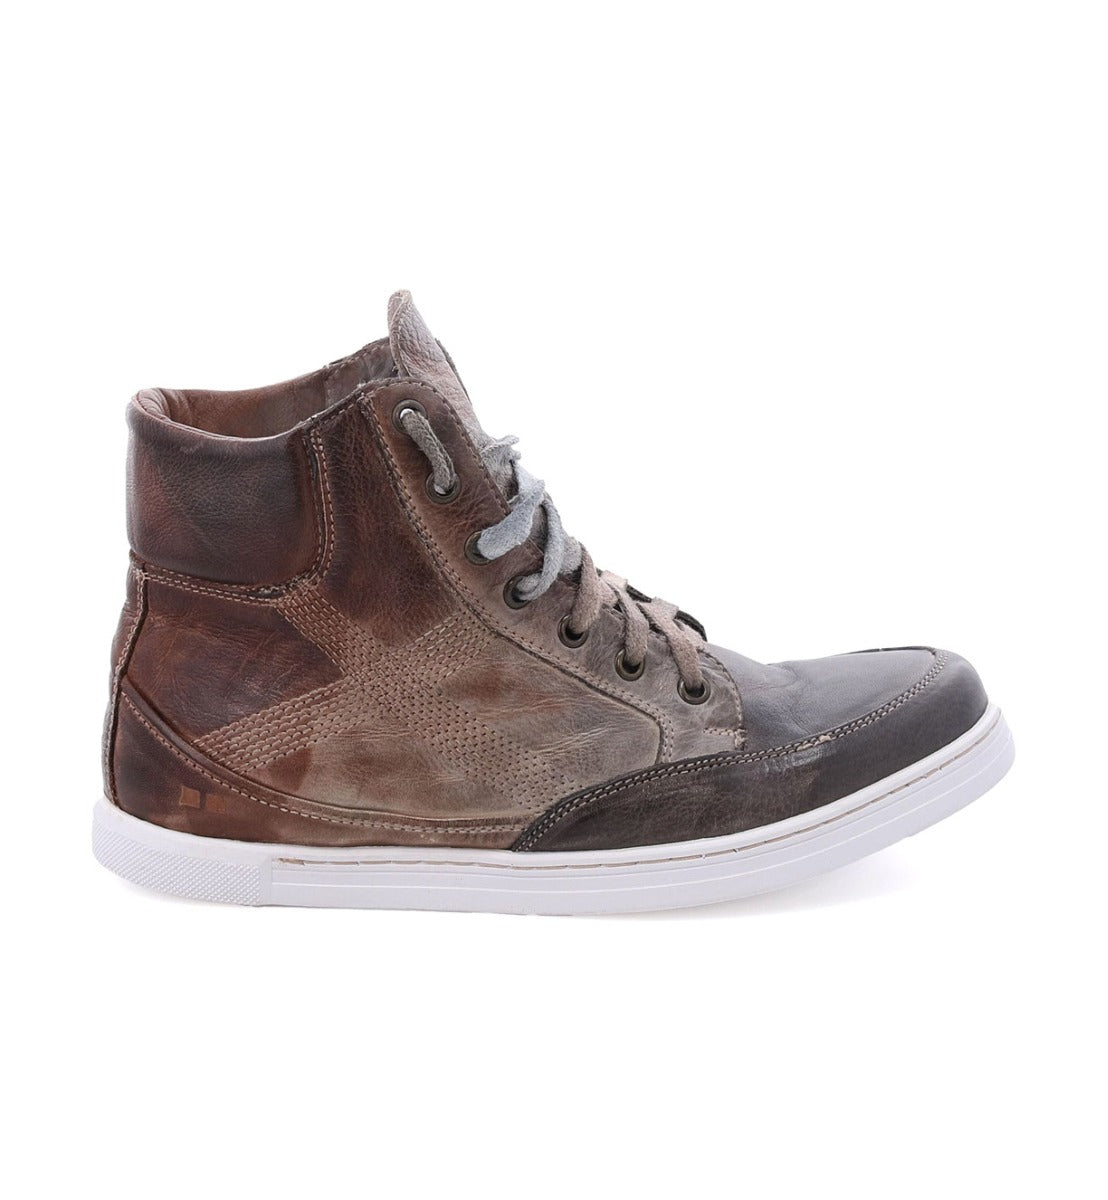 A men's brown high top Lordmind sneaker on a white background by Bed Stu.